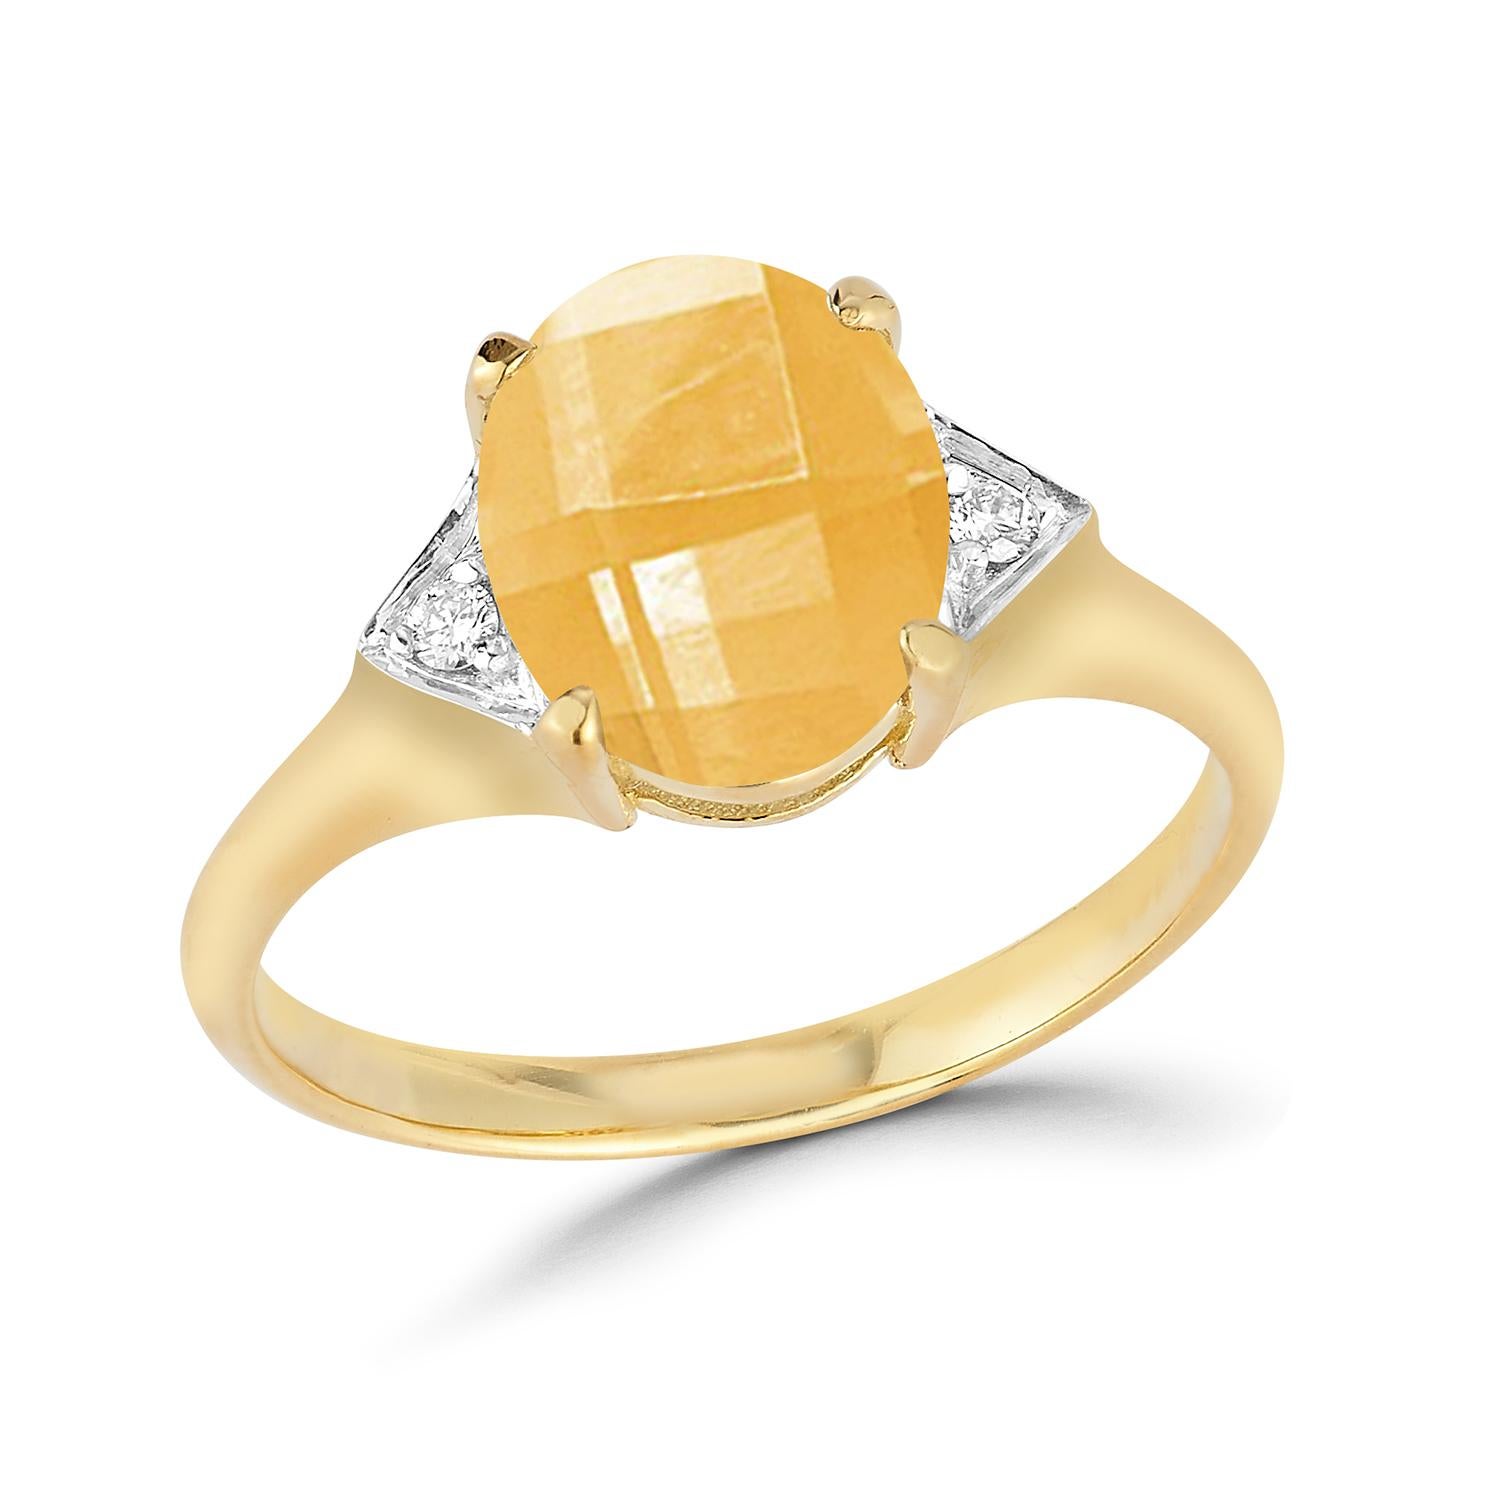 For Sale:  Hand-Crafted 14K Yellow Gold 0.05 ct. tw. Diamond & 4.75CT Citrine Cocktail Ring 4